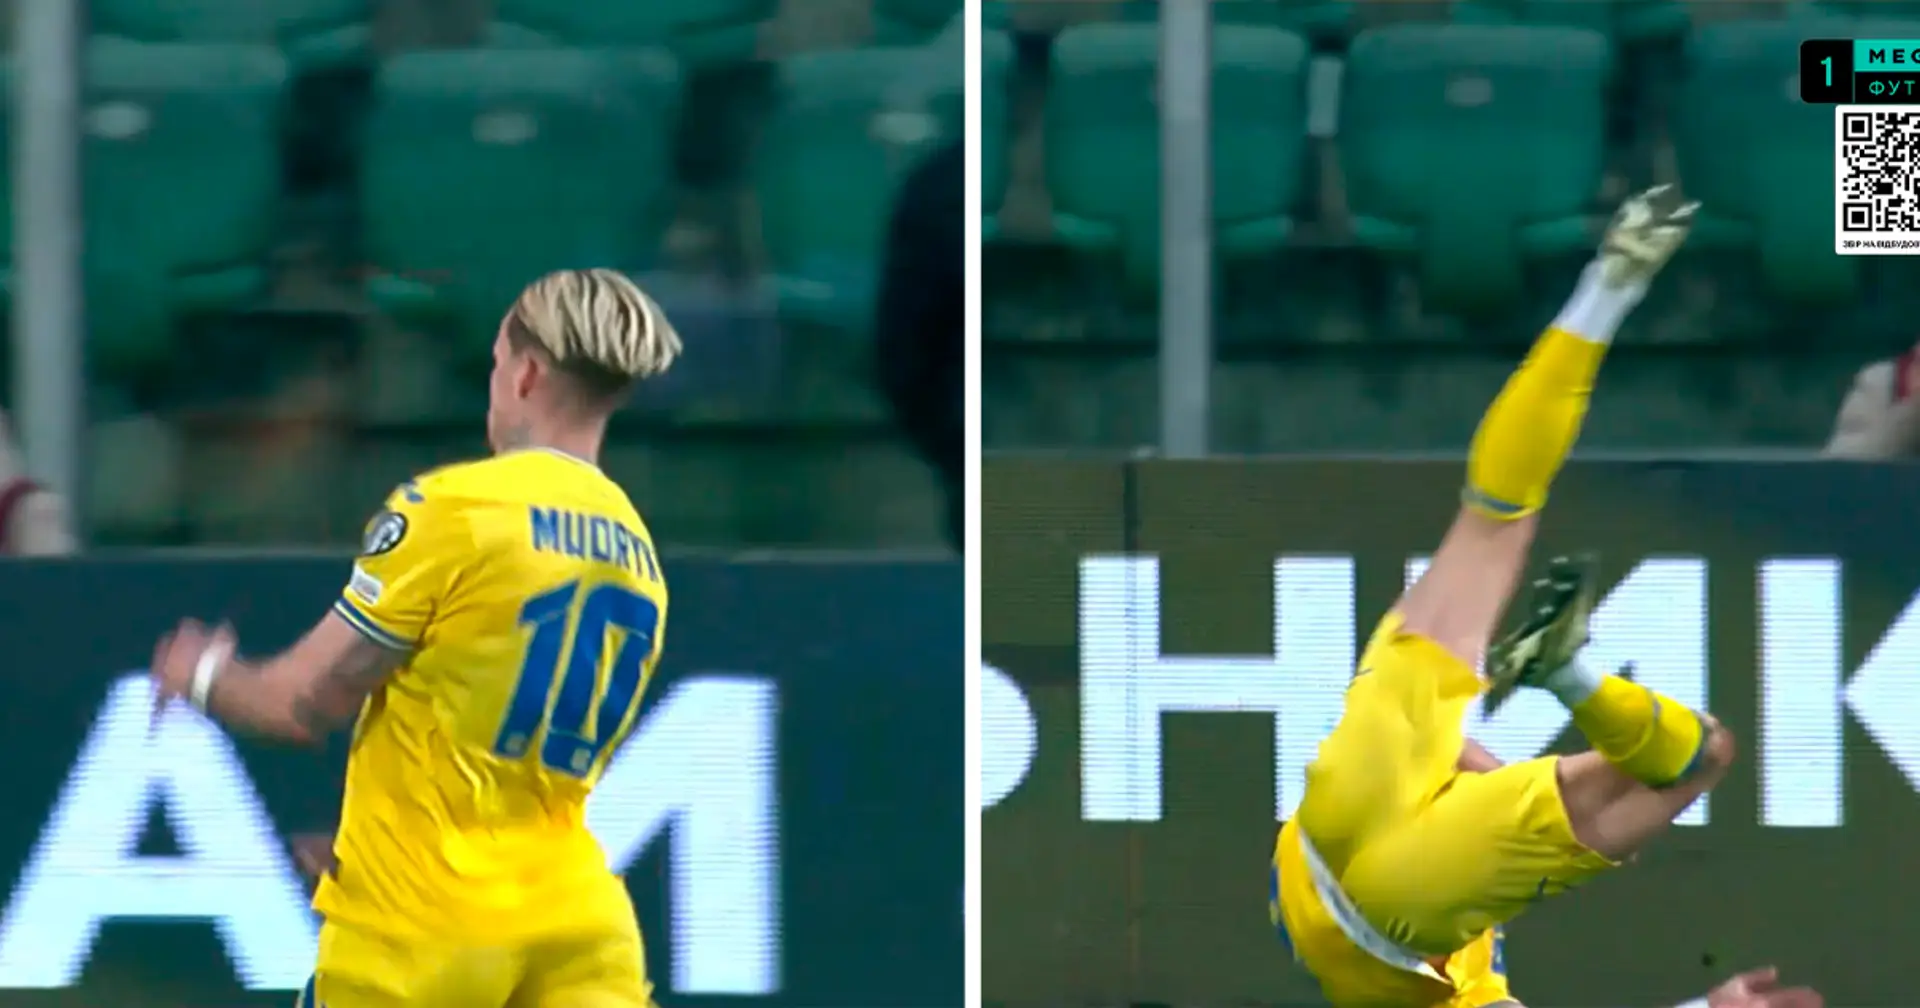 Spotted: Mudryk tries a knee slide celebration after scoring a winner for Ukraine - and fails spectacularly